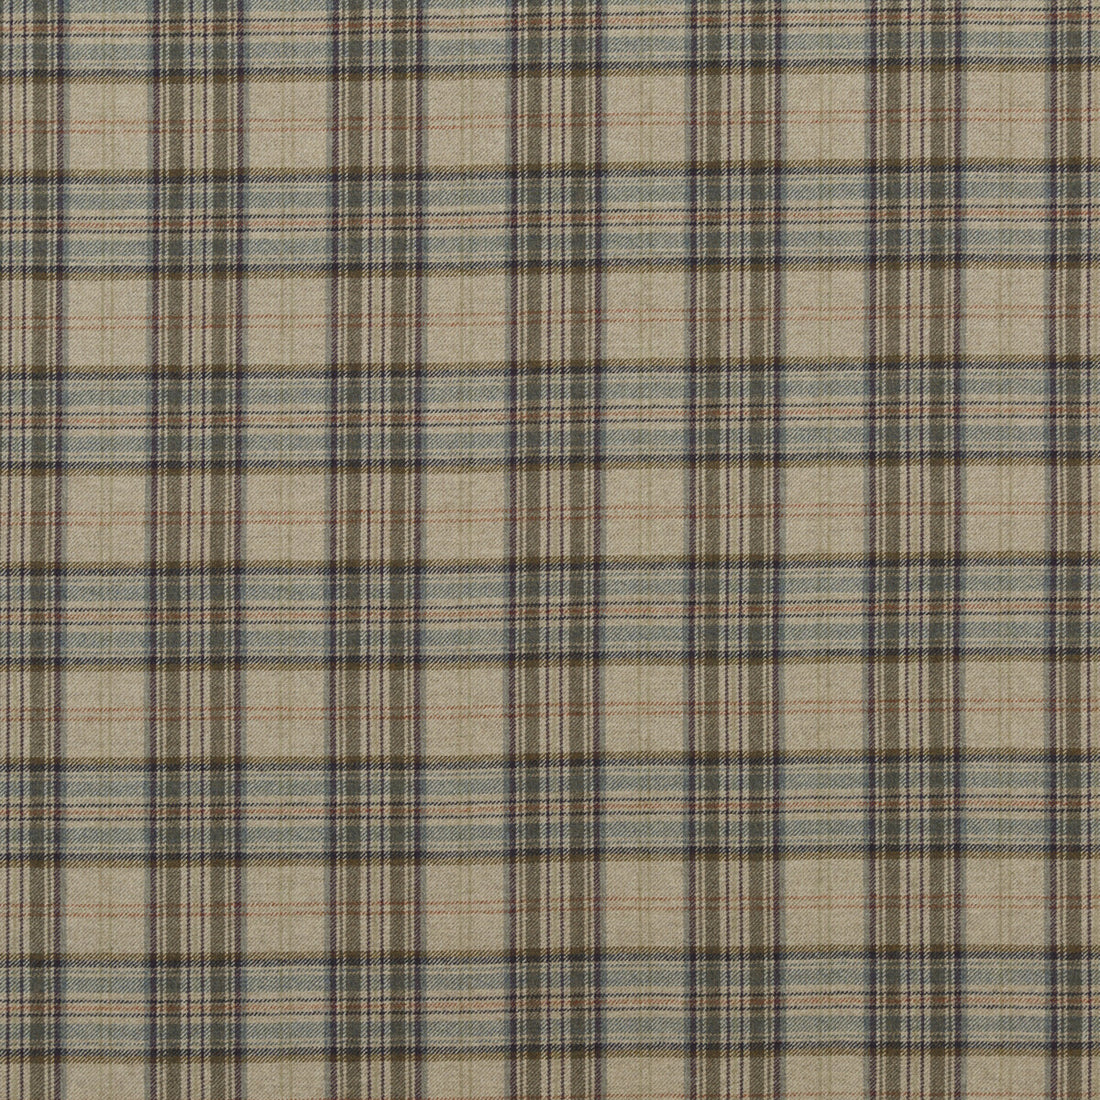 Victoria Plaid fabric in soft jade color - pattern BF10655.3.0 - by G P &amp; J Baker in the Historic Royal Palaces collection